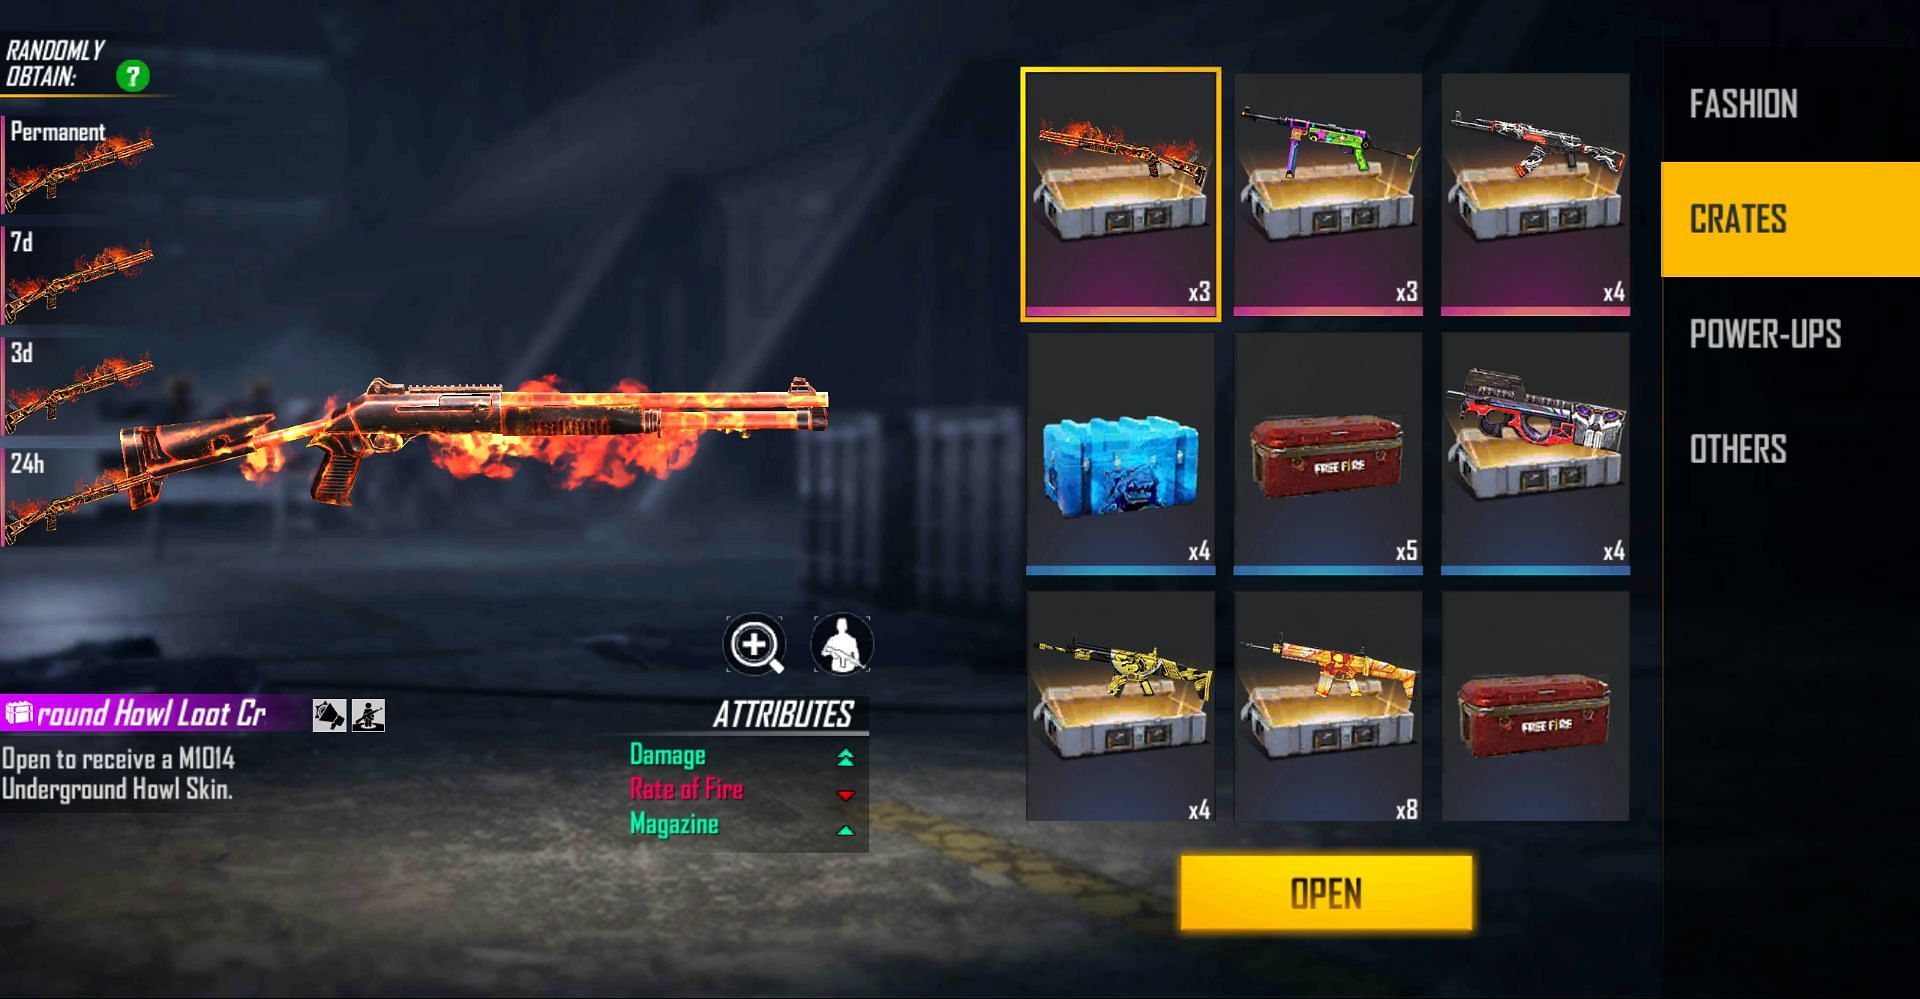 The loot crate can give a permanent item as well (Image via Free FIre)